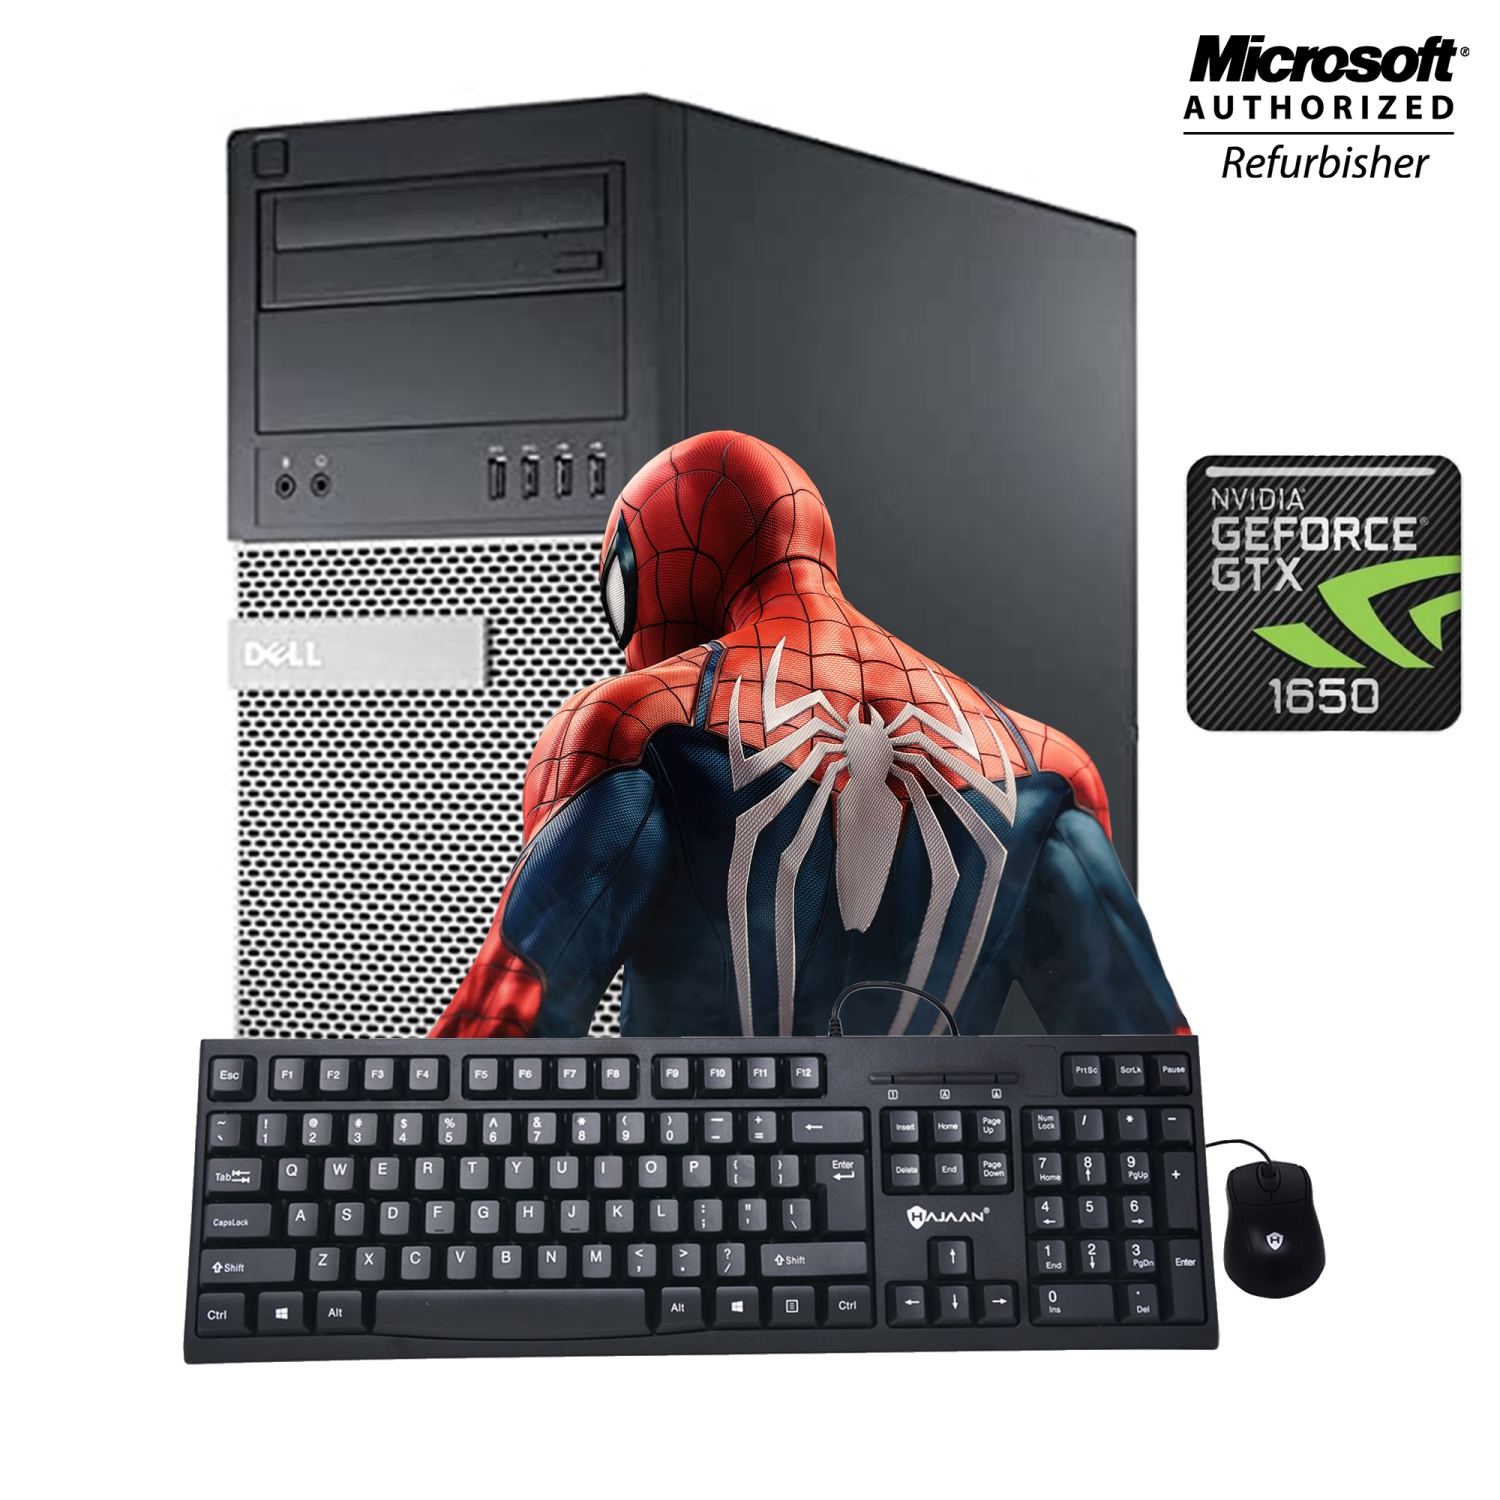 Gaming Desktop Computer Dell 7020 Tower Intel I5 4570 upto 3.60 Ghz 16GB DDR3 RAM New 1TB SSD Nvidia GeForce GTX 1650 Keyboard & Mouse Wifi Win 10 Pro - Refurbished